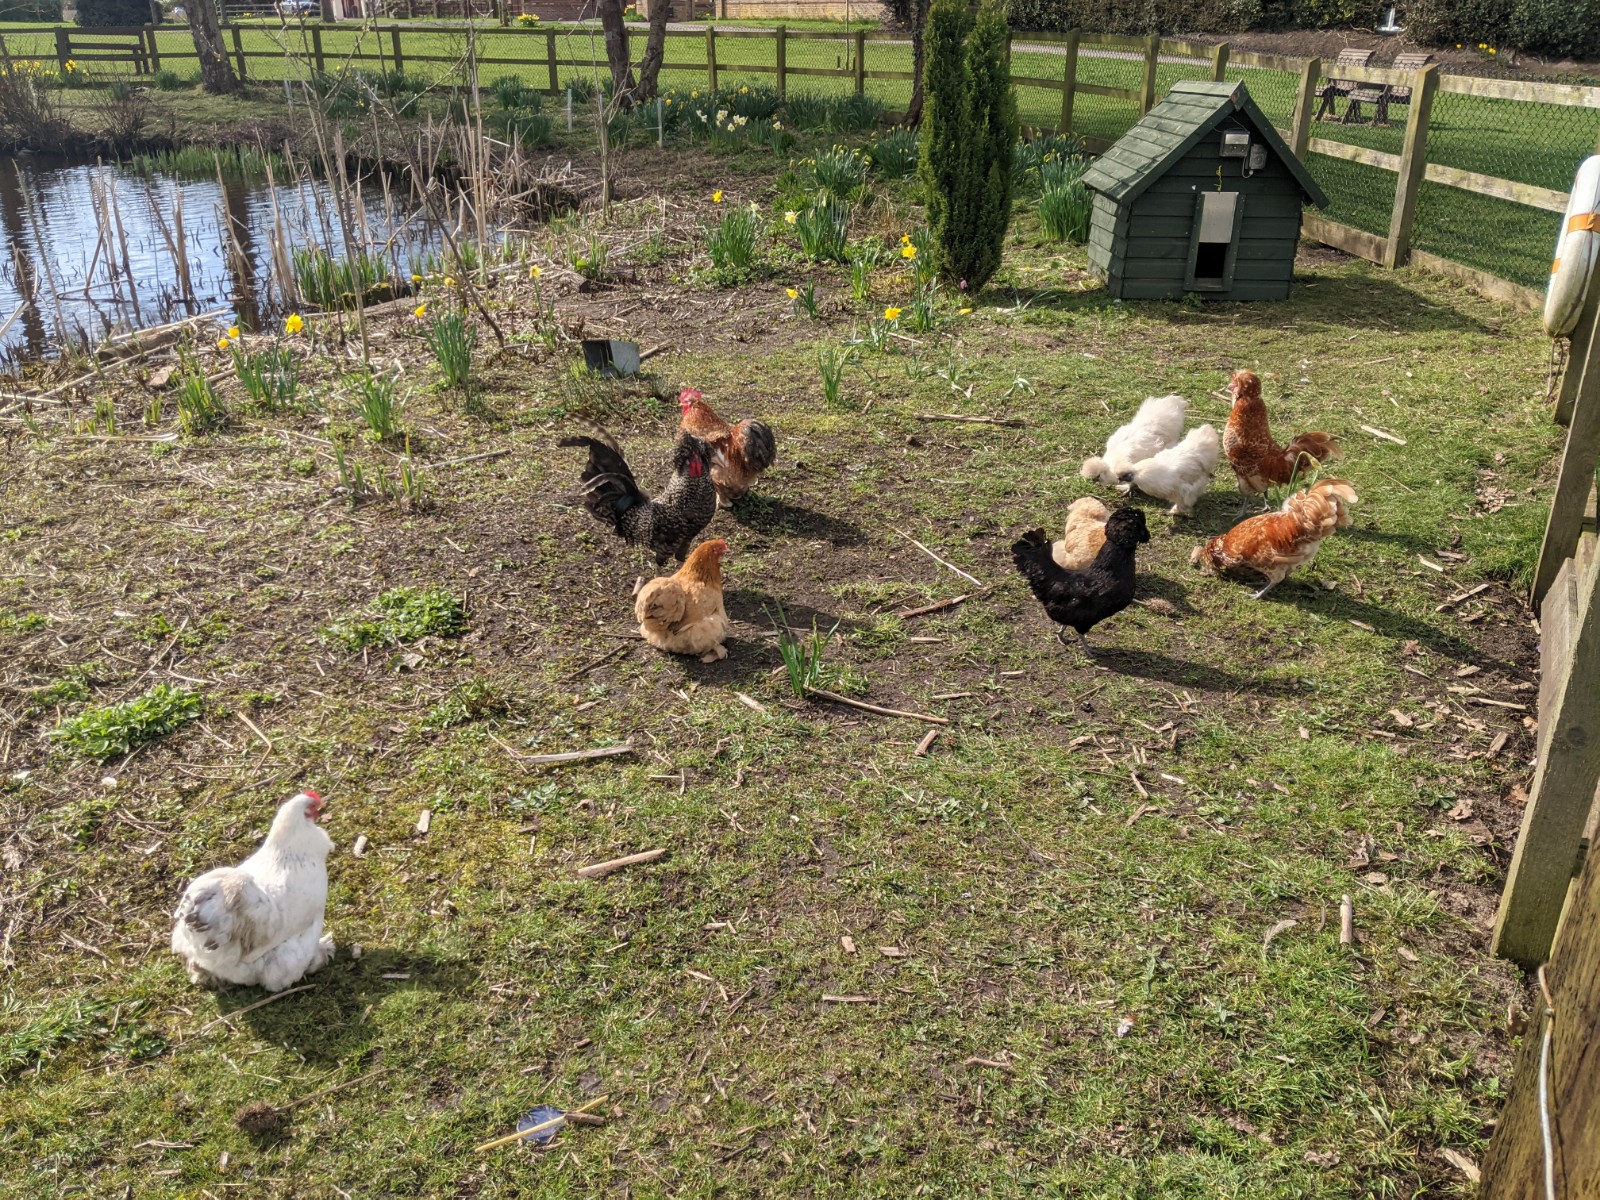 Return of the chickens, March 27th